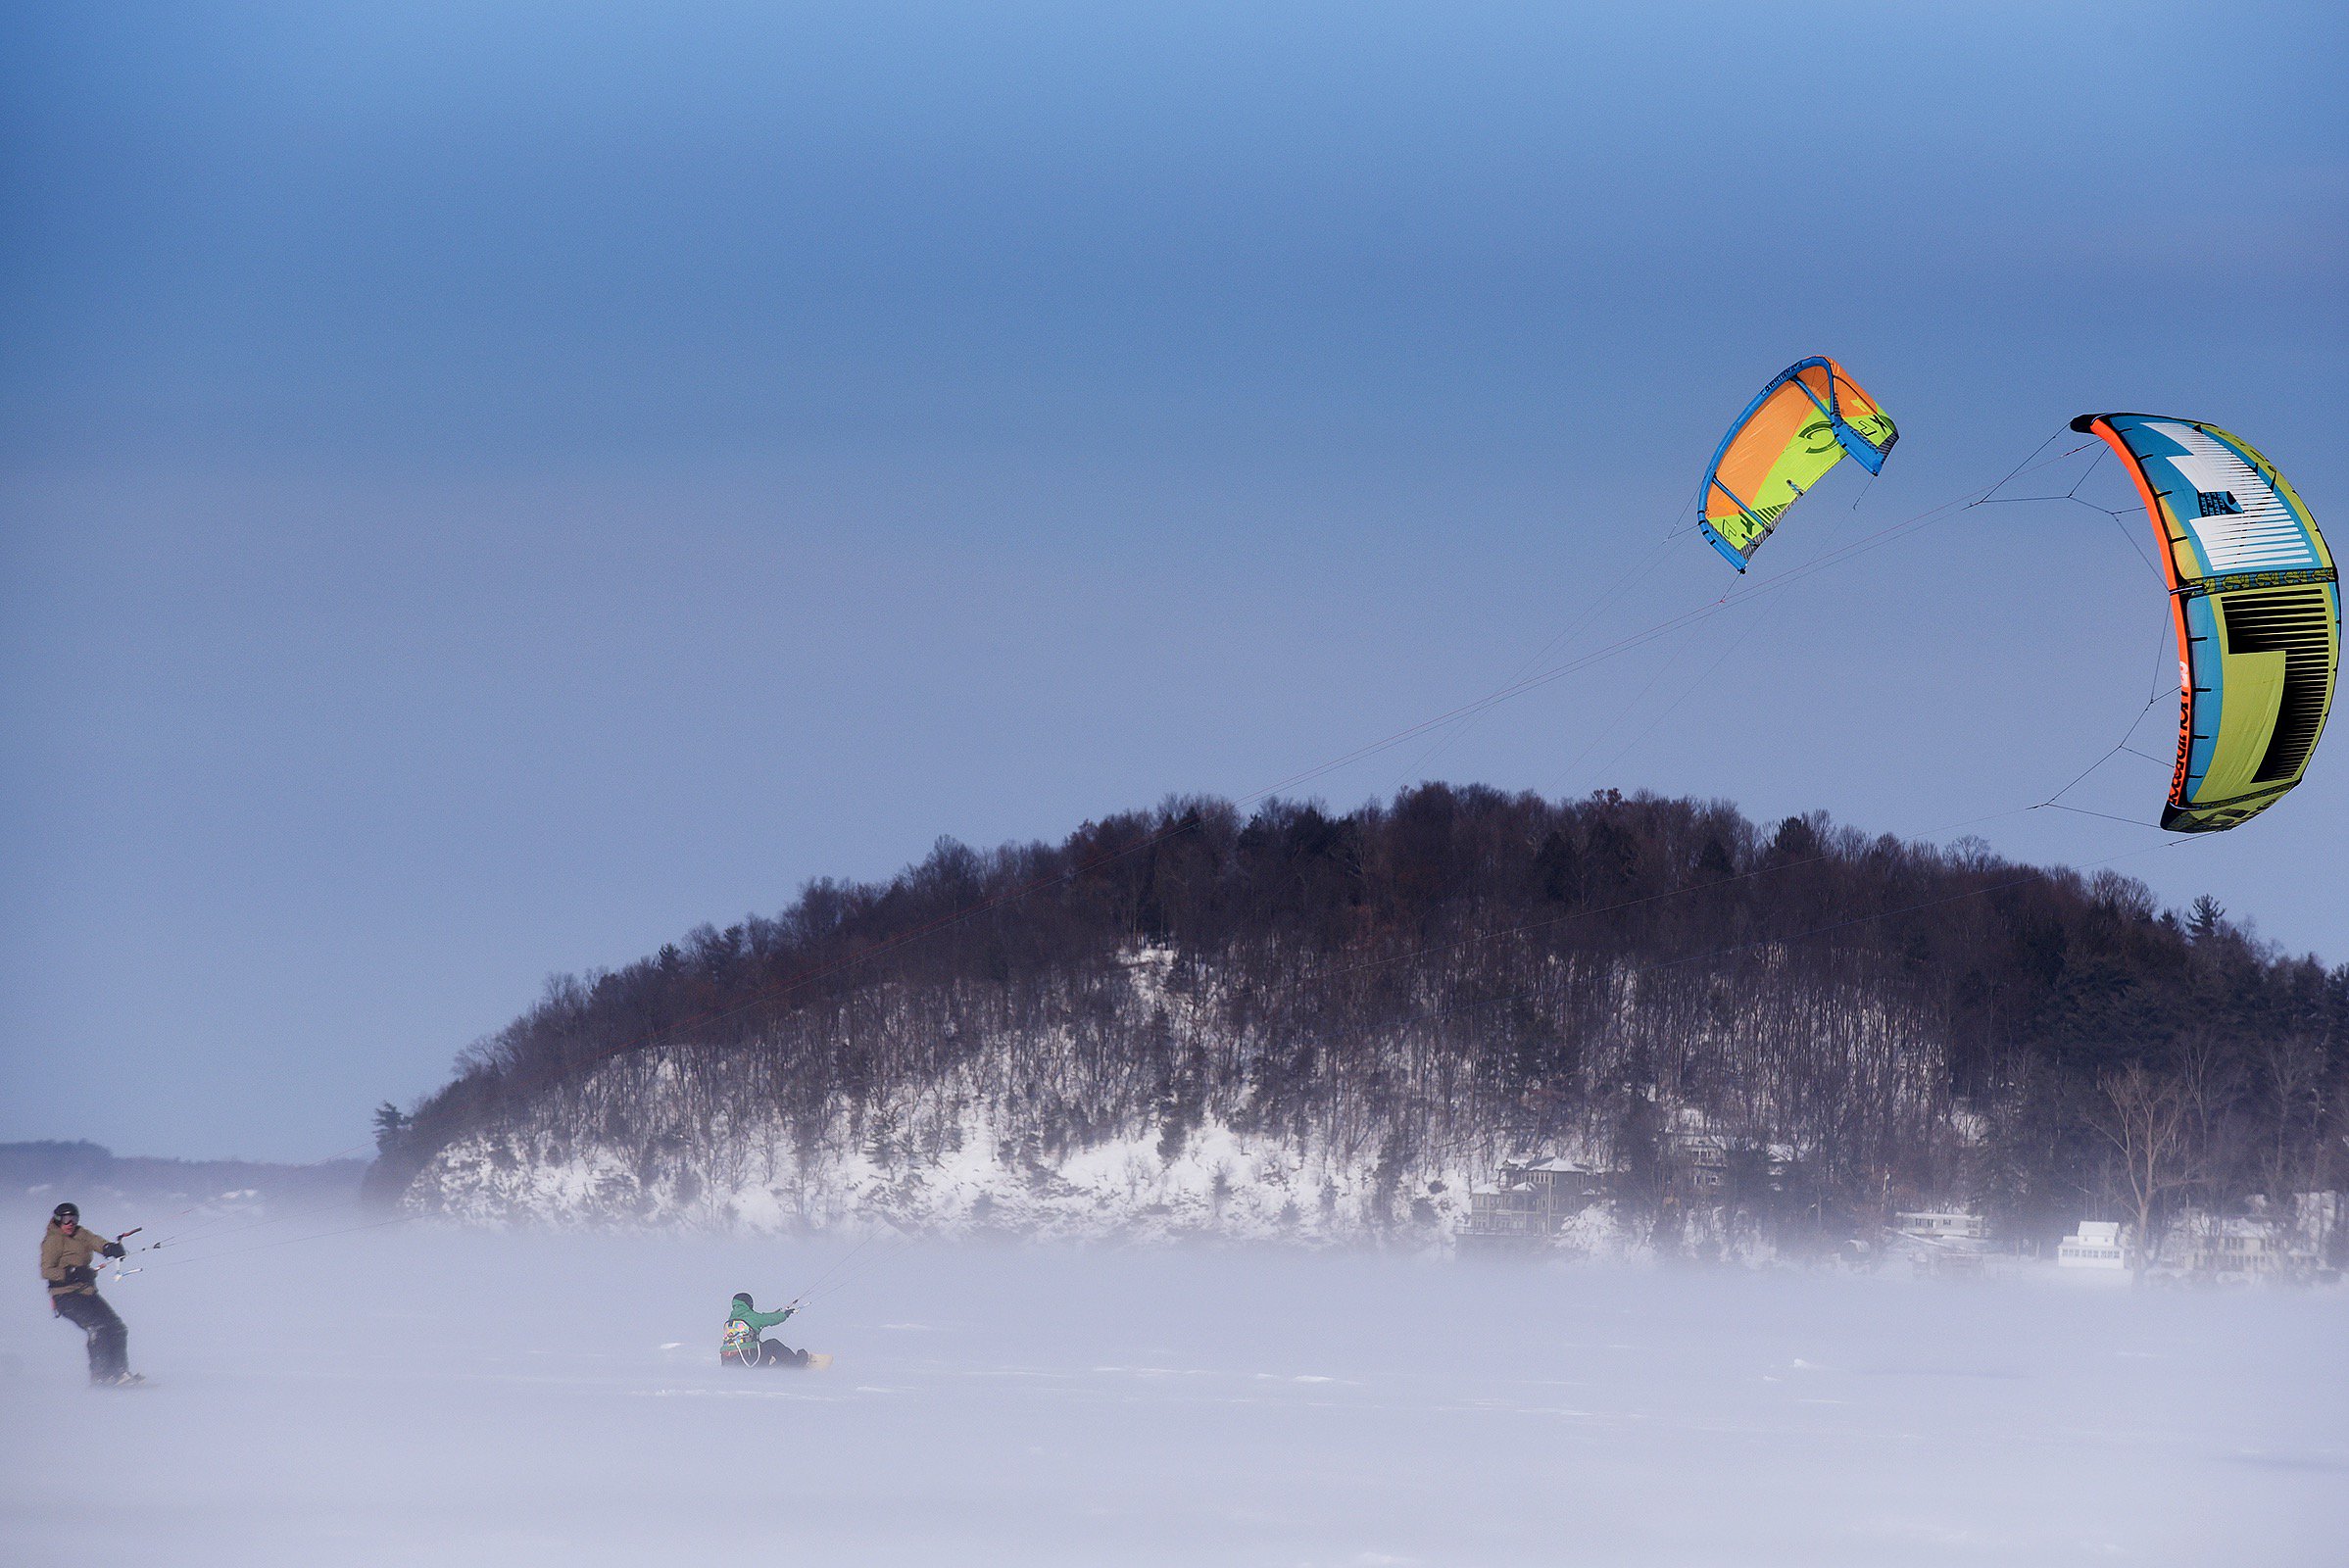 Erica Miller on X: The Wind Hogs Club members, of Ballston Lake, snow  kiting on Saratoga Lake as they took advantage of the cold weather and  strong winds #snowkiting #kiteboarding #SaratogaLake #Saratoga